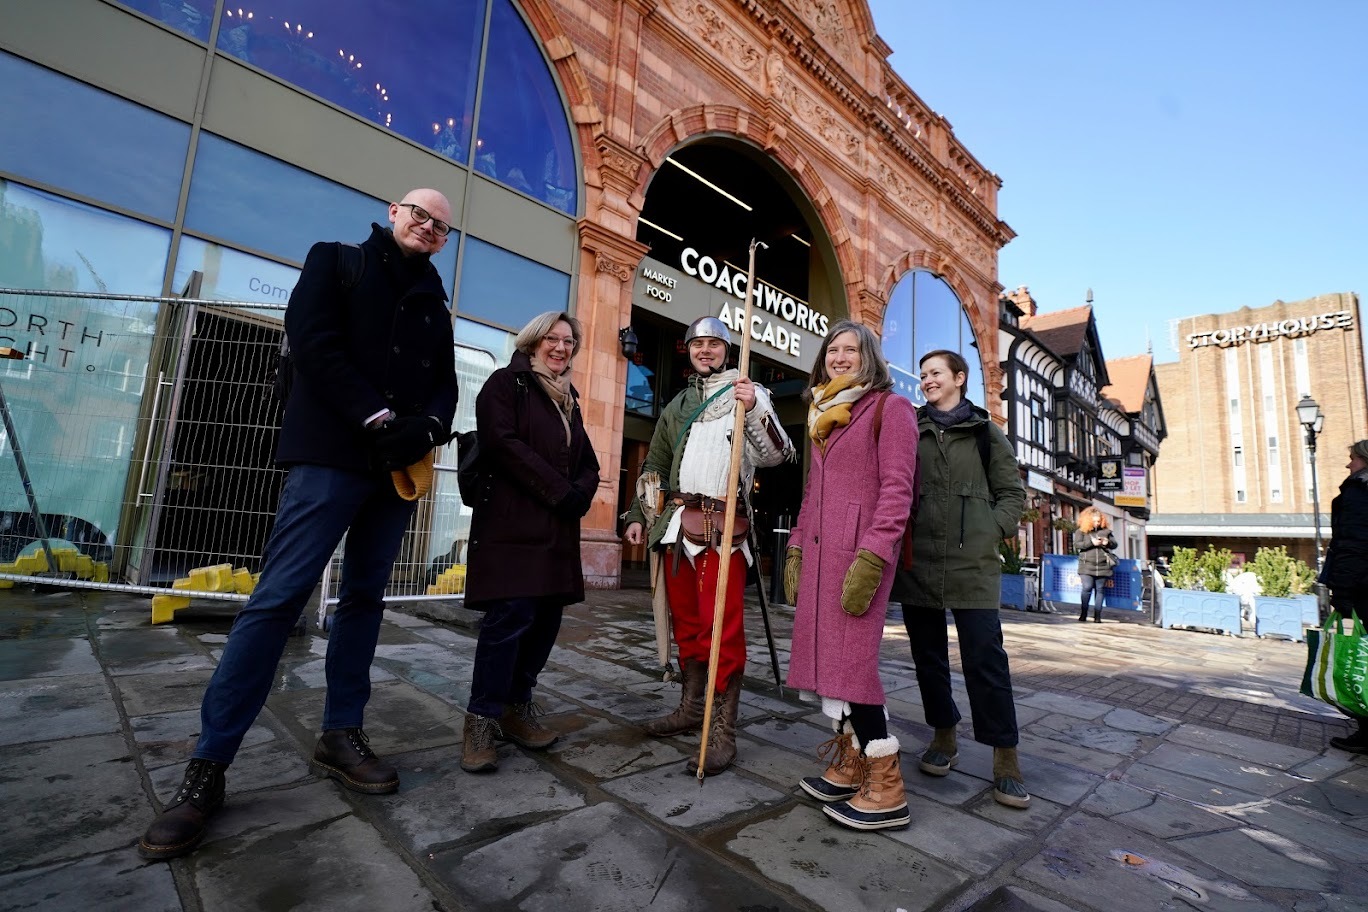 Cllr Richard Beacham, Samantha Dixon MP, Daniel Lowe (Guide in Medieval history from Roman Tours), Marie Smallwood (Head of Advice North, Historic England) and Pippa Brown (Historic Places Adviser, Historic England) outside of the refurbished Coachworks.